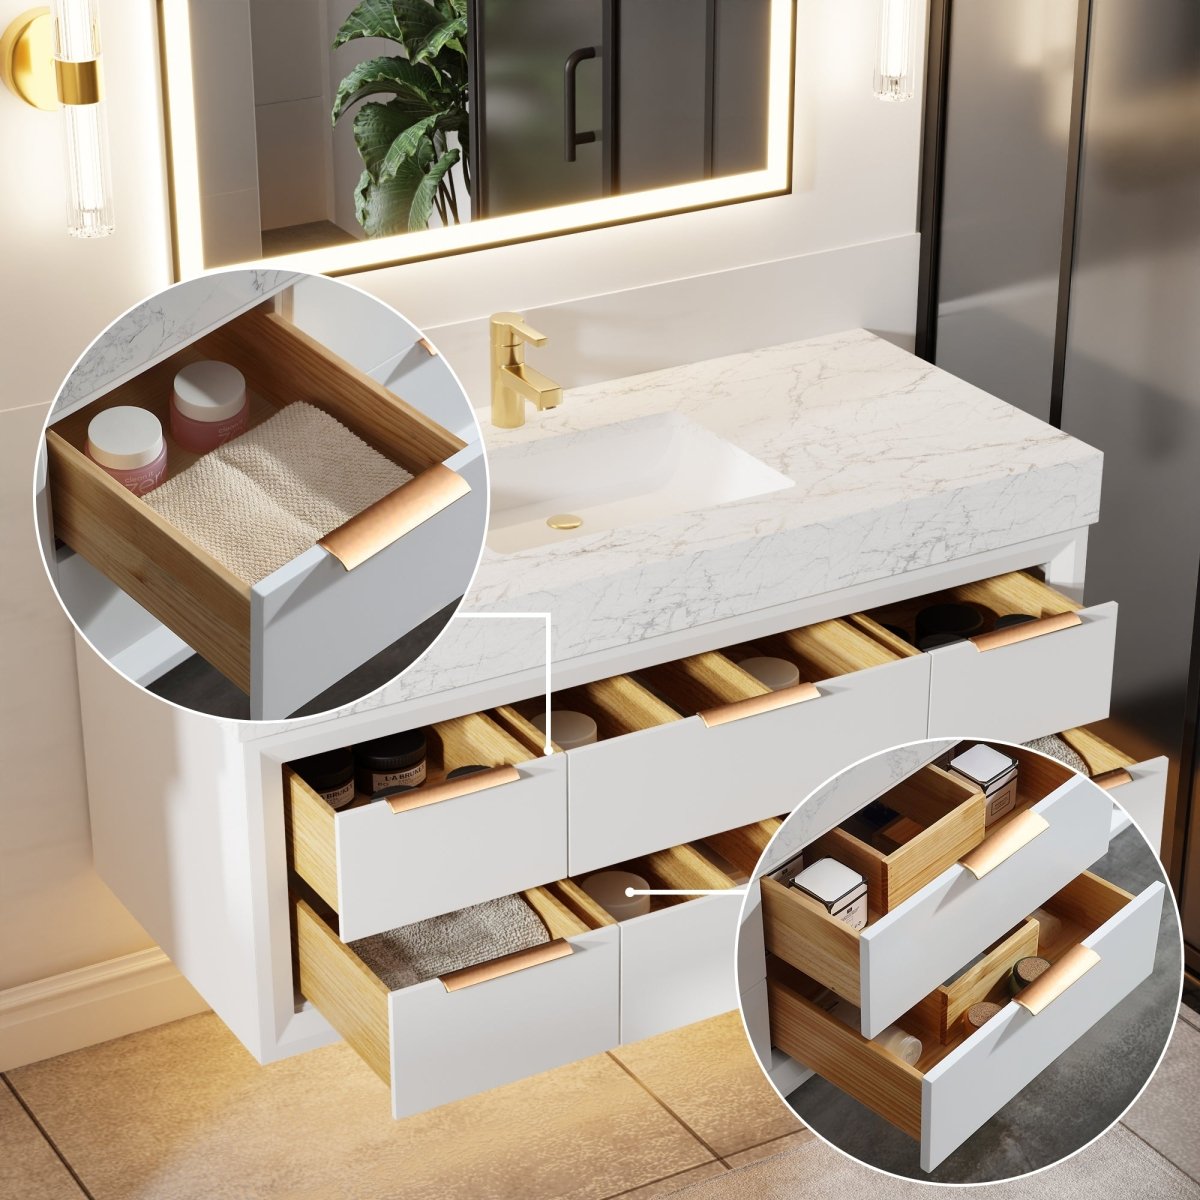 Glam 48" Modern Floating White Rubberwood Bathroom Vanity Cabinet with Lights and Stone Slab Countertop, Single Sinks